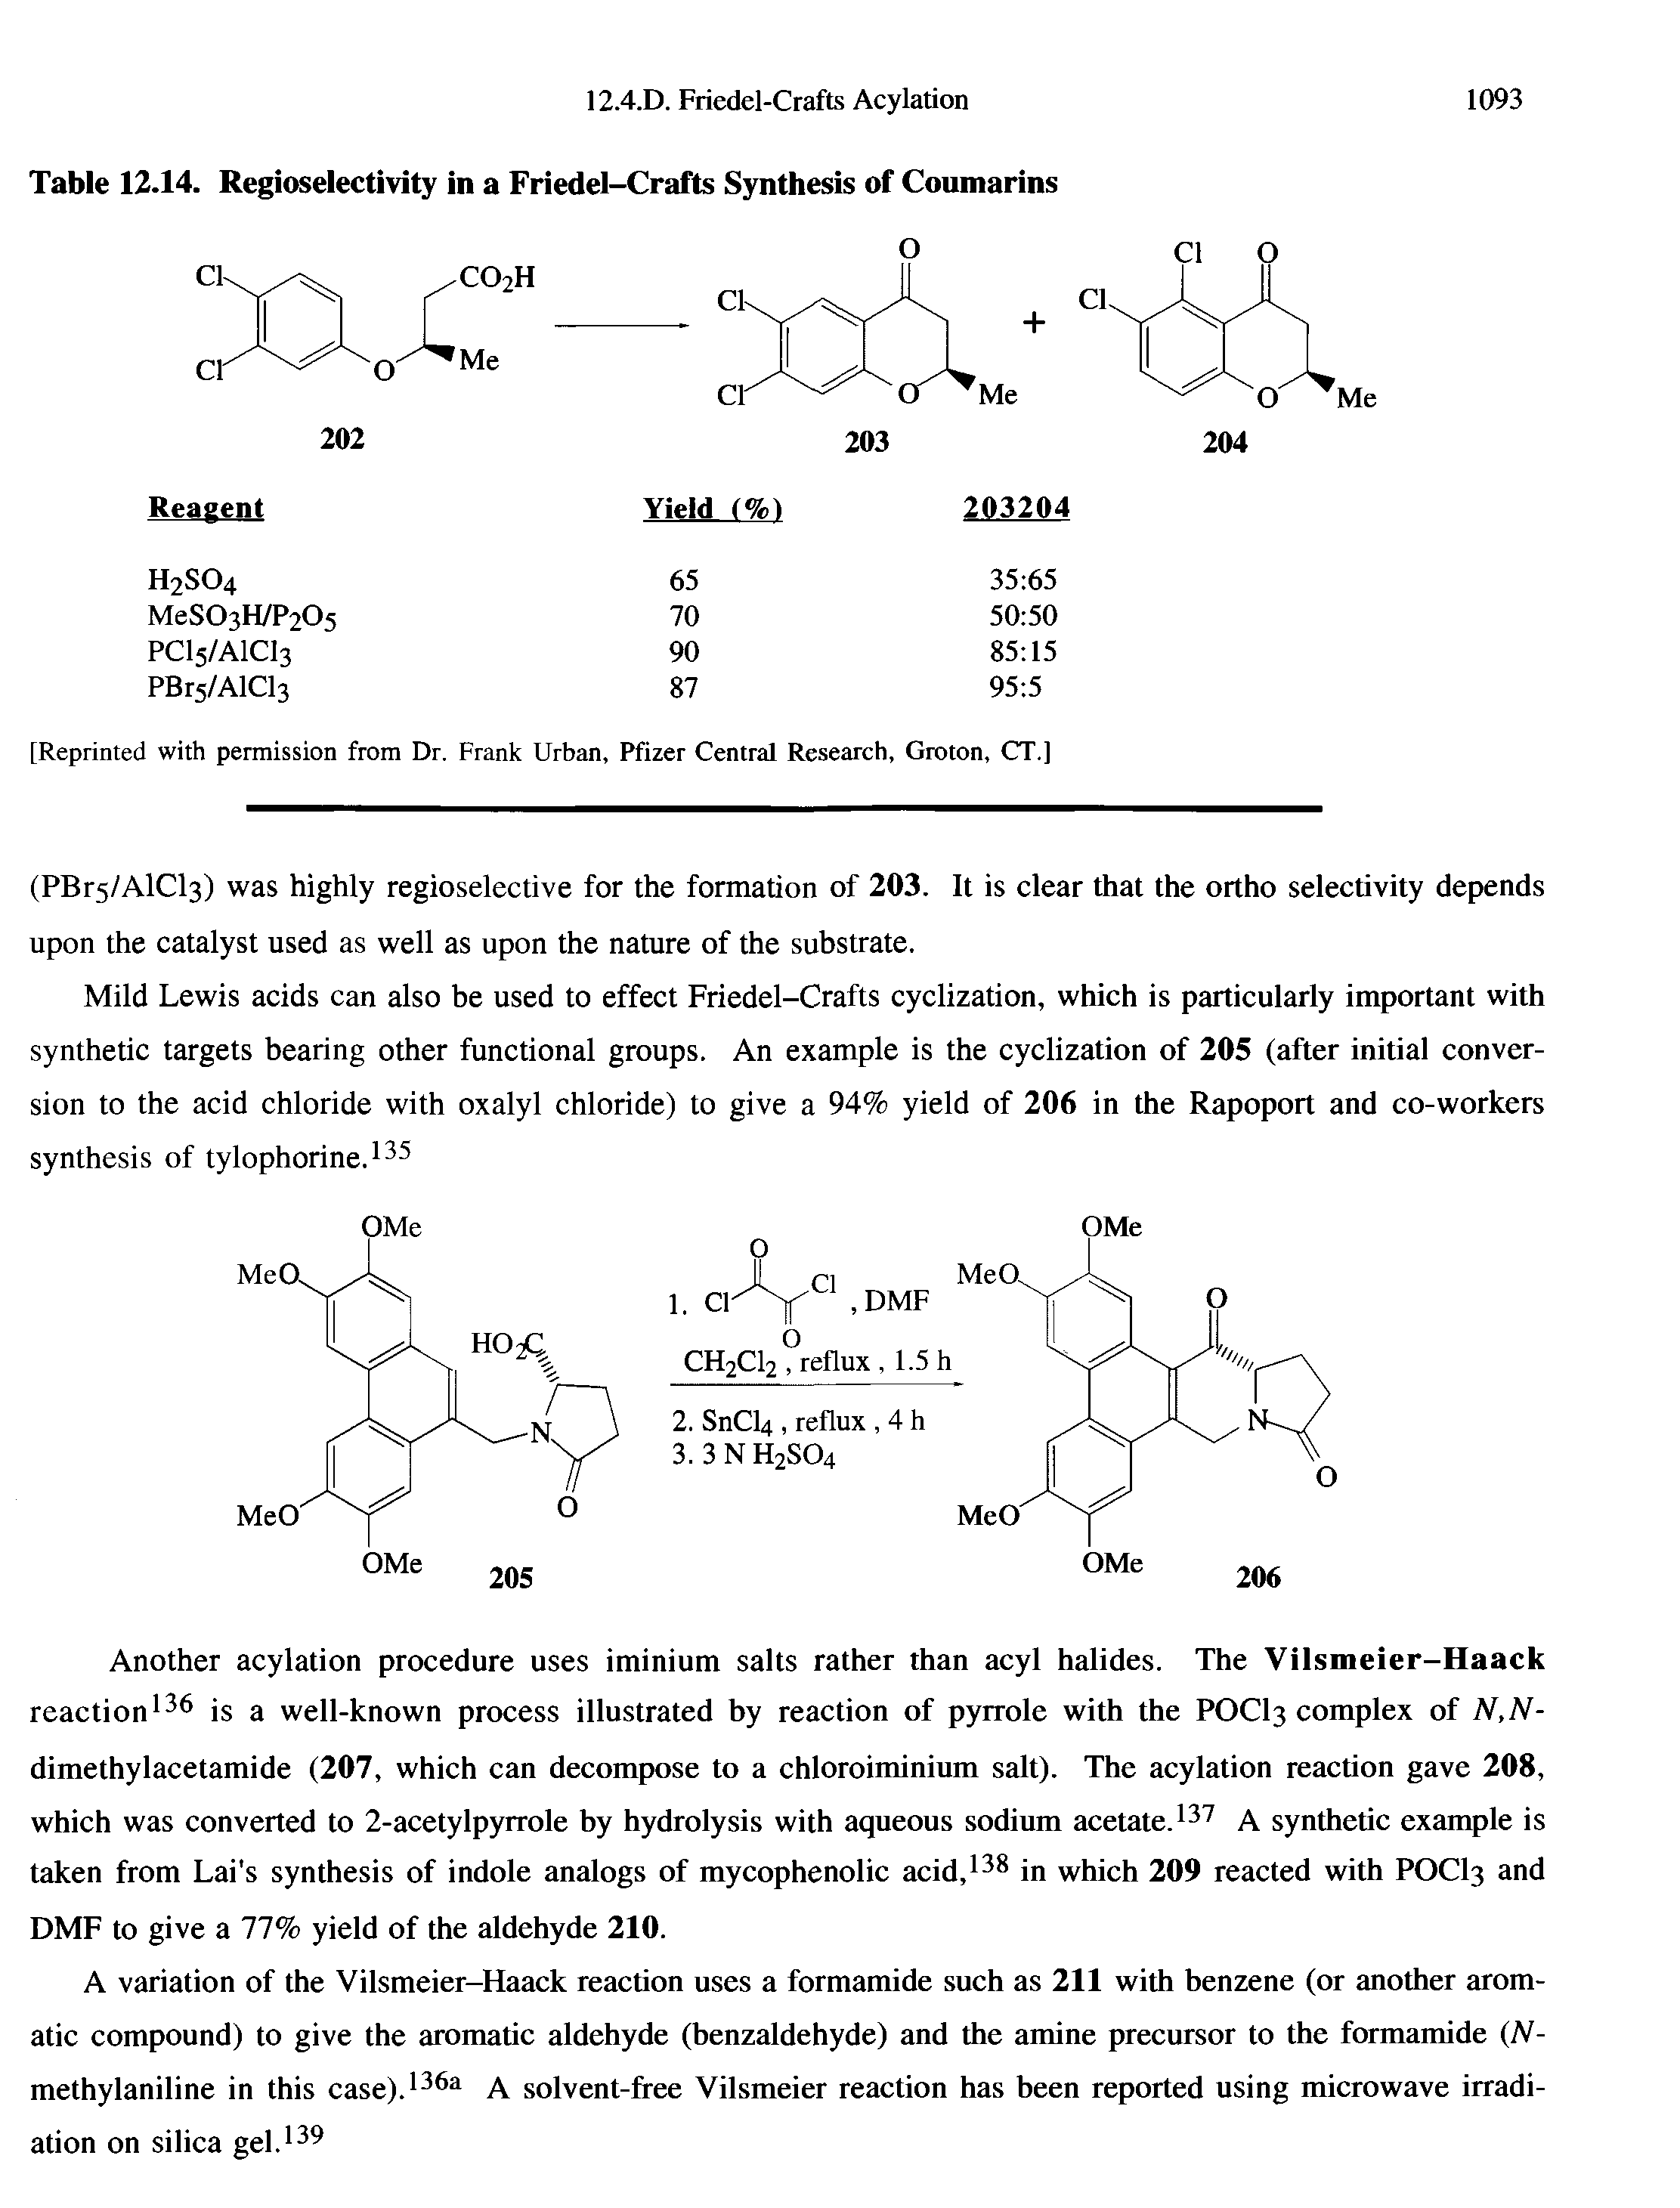 Table 12.14. Regioselectivity in a Friedel-Crafts Synthesis of Coumarins...